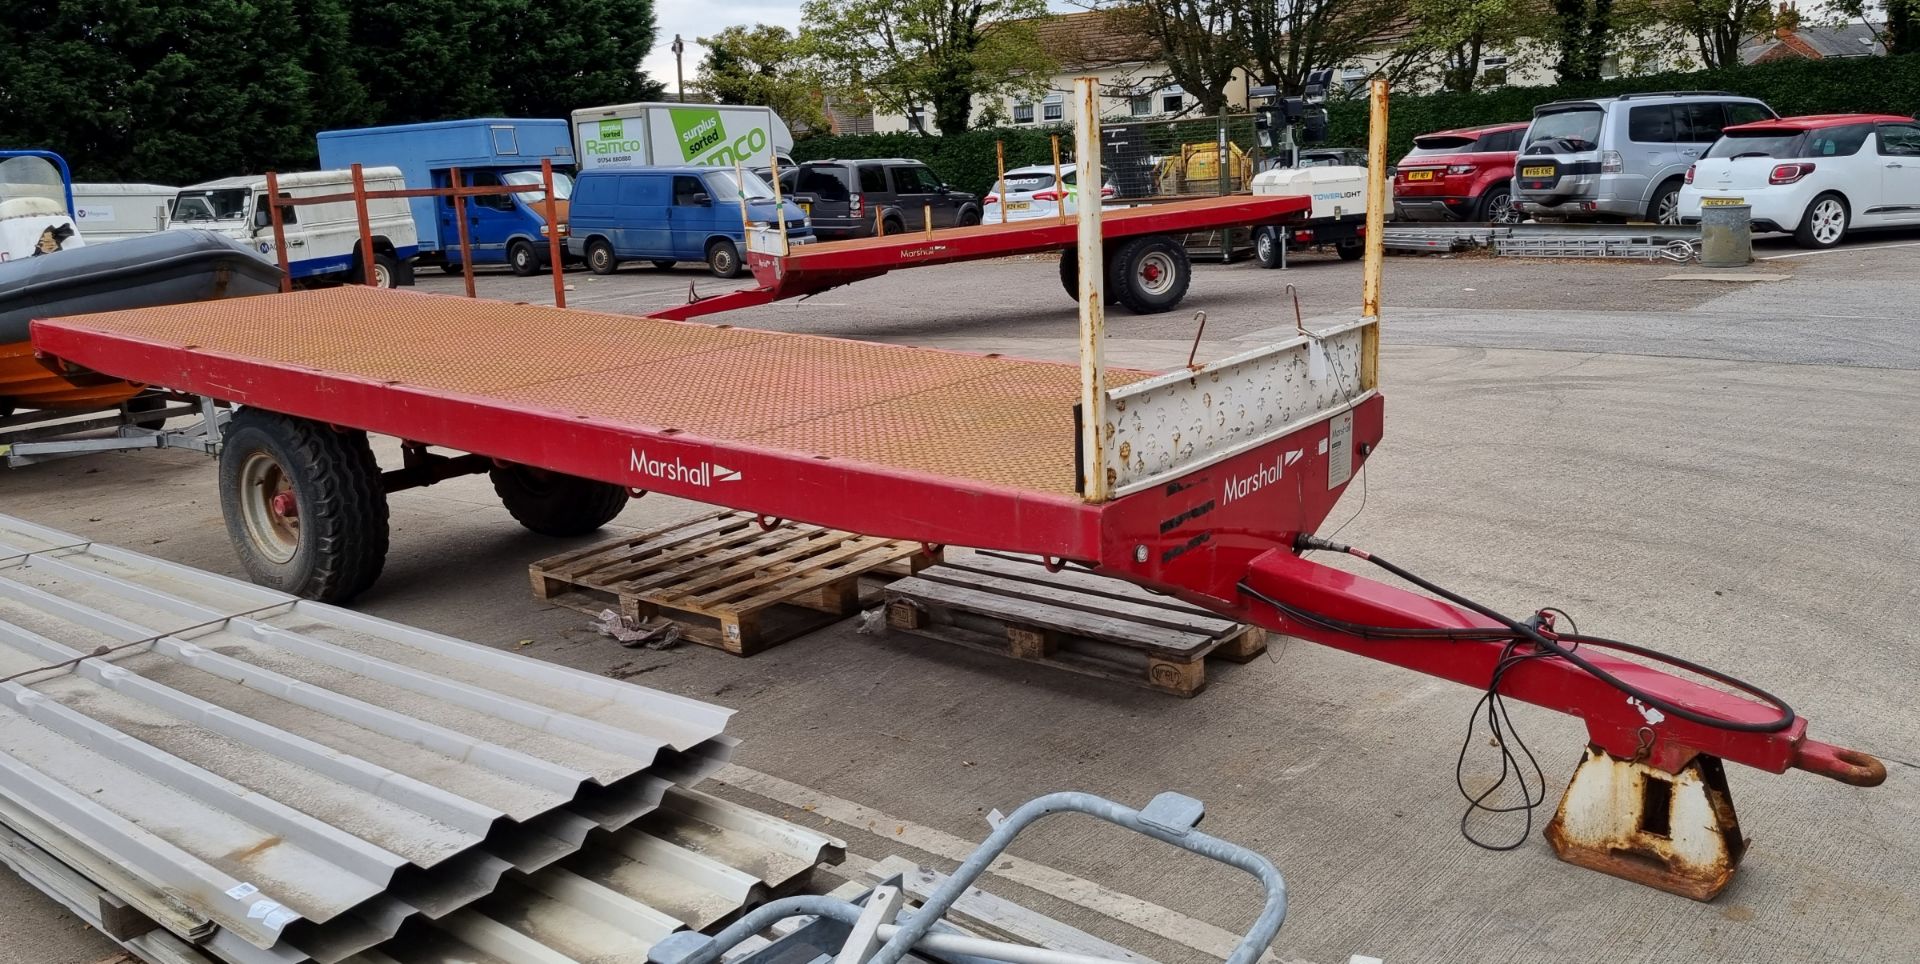 Marshall BC18N 2019 single axle flatbed trailer - 5000 kg carrying capacity - 40kph max design speed - Image 4 of 8